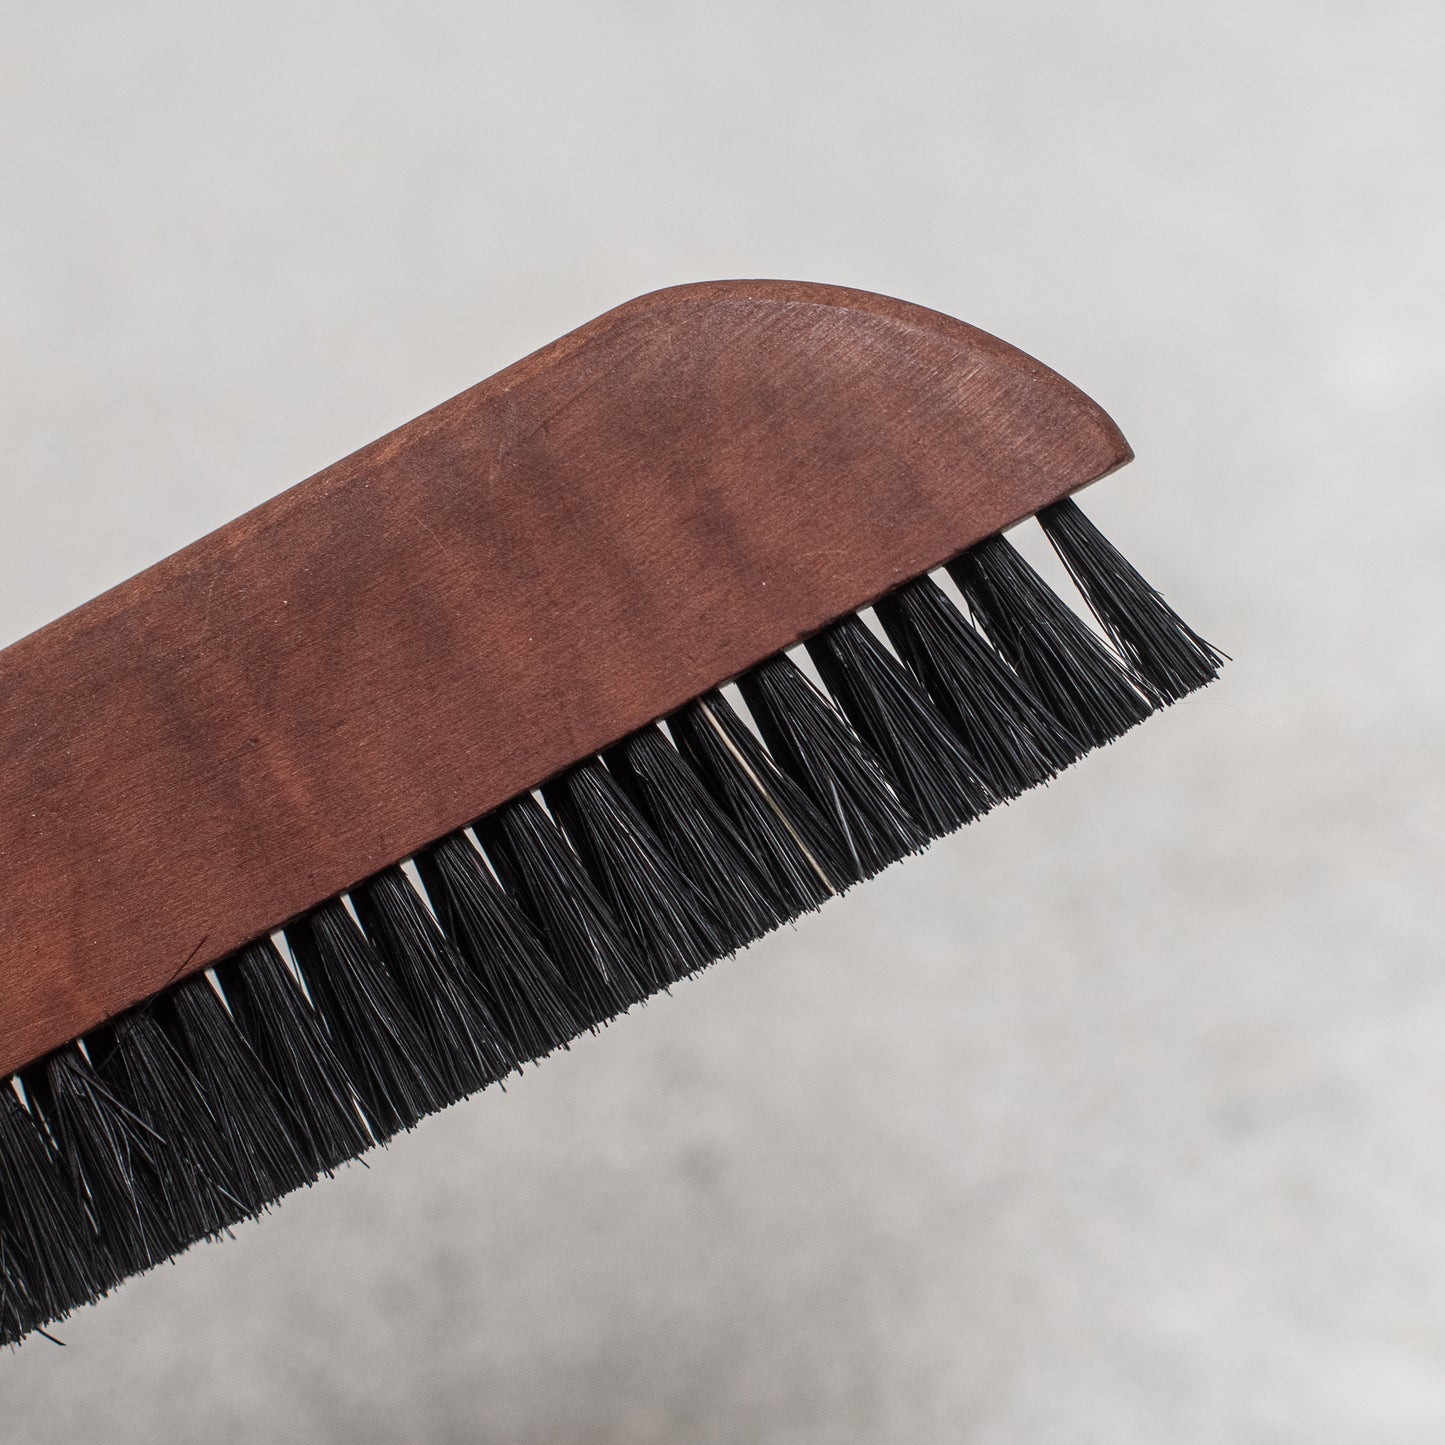 Clothes Brush - Travel Size.